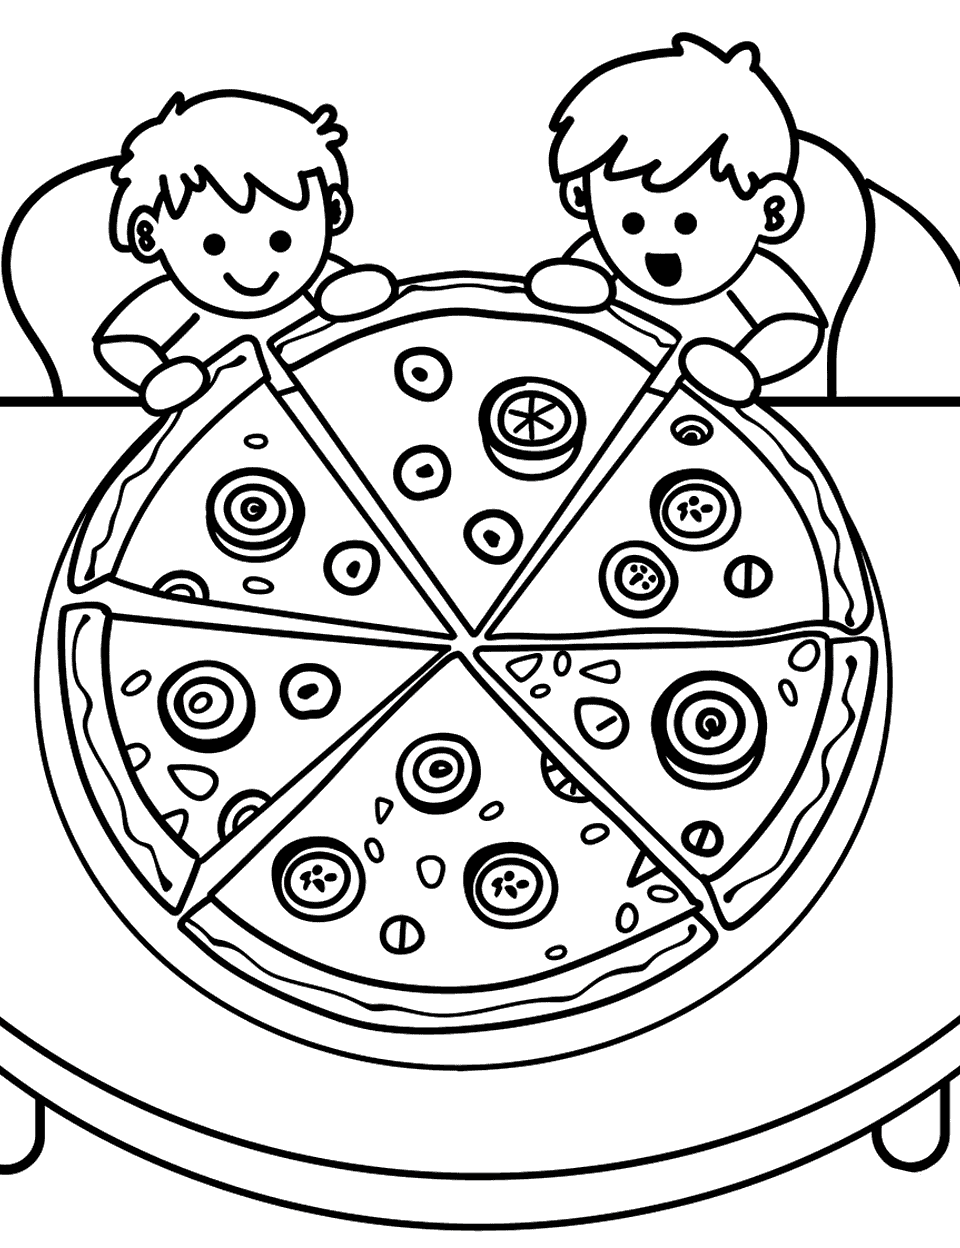 Pizza Craft Time Coloring Page - Two kids sitting around a table after crafting a huge paper pizza.